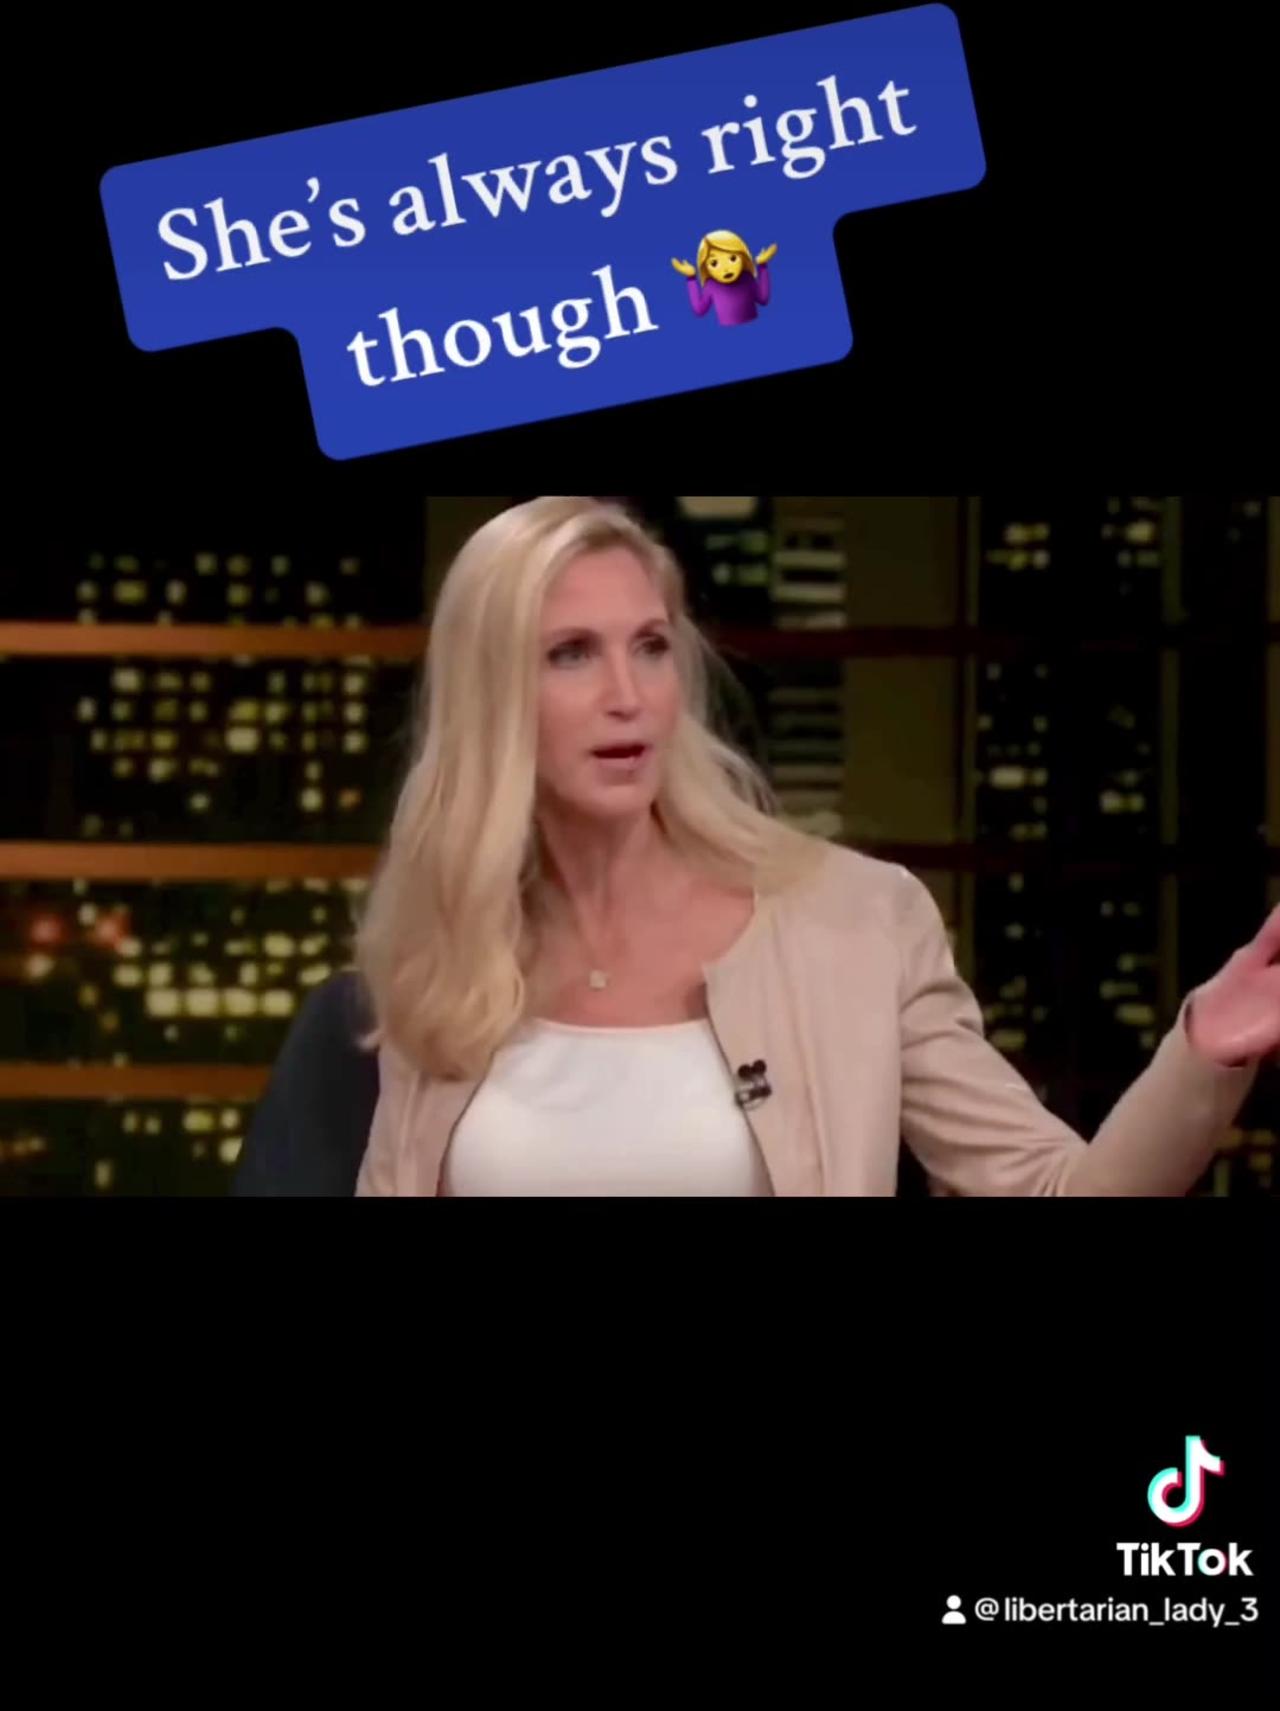 Ann Coulter was right again